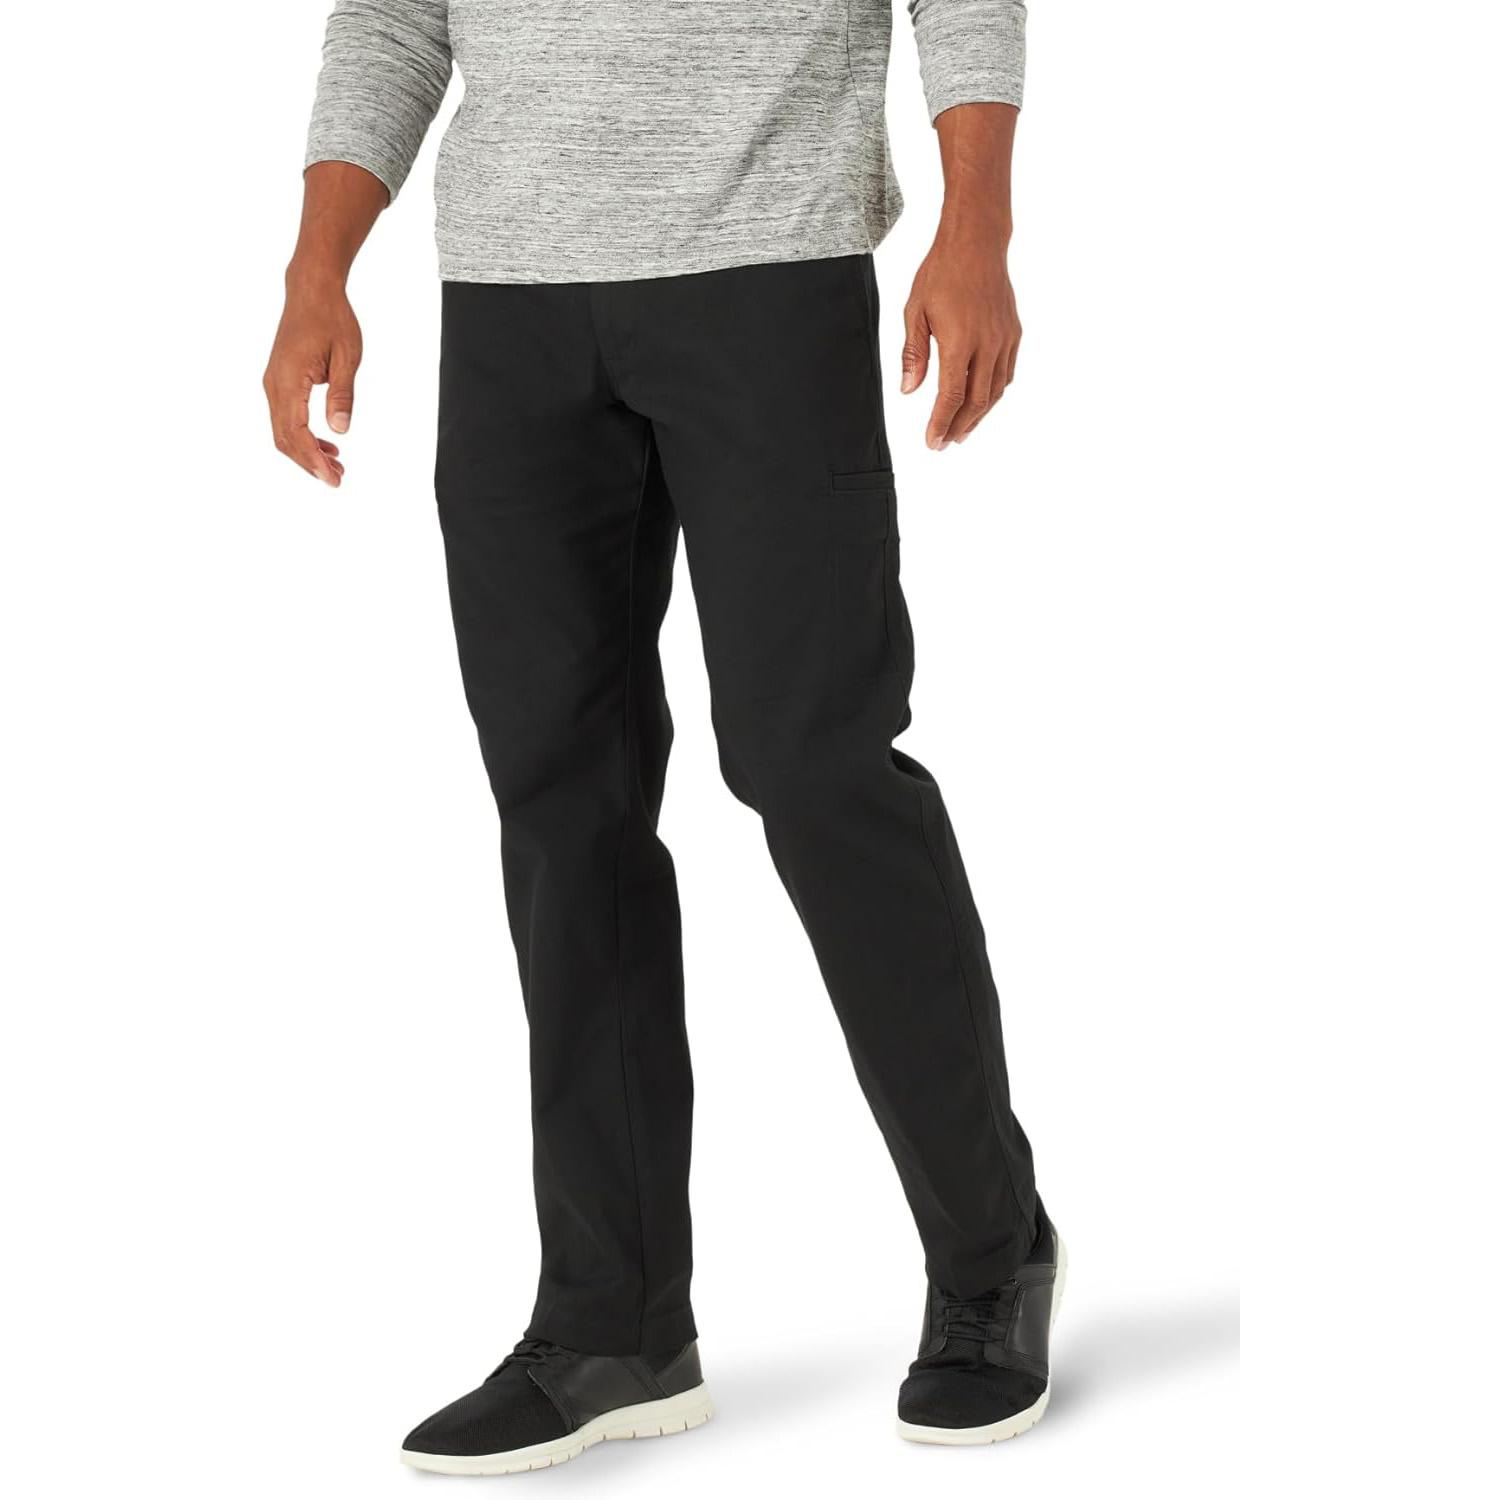 Lee Mens Extreme Motion Canvas Cargo Pants for $19.99